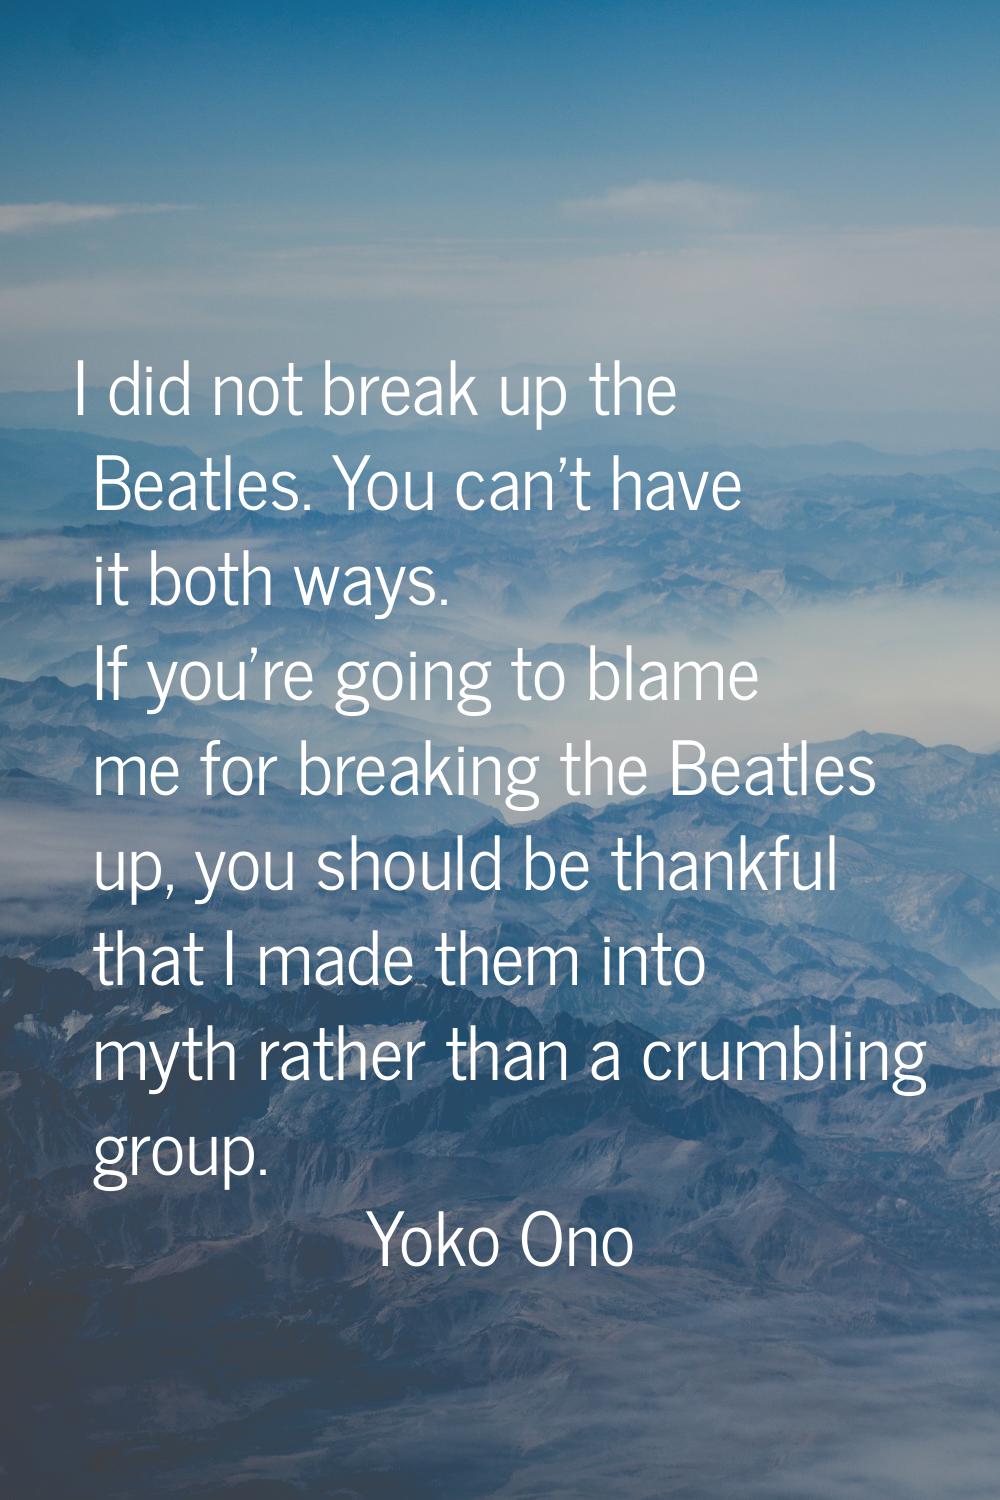 I did not break up the Beatles. You can't have it both ways. If you're going to blame me for breaki